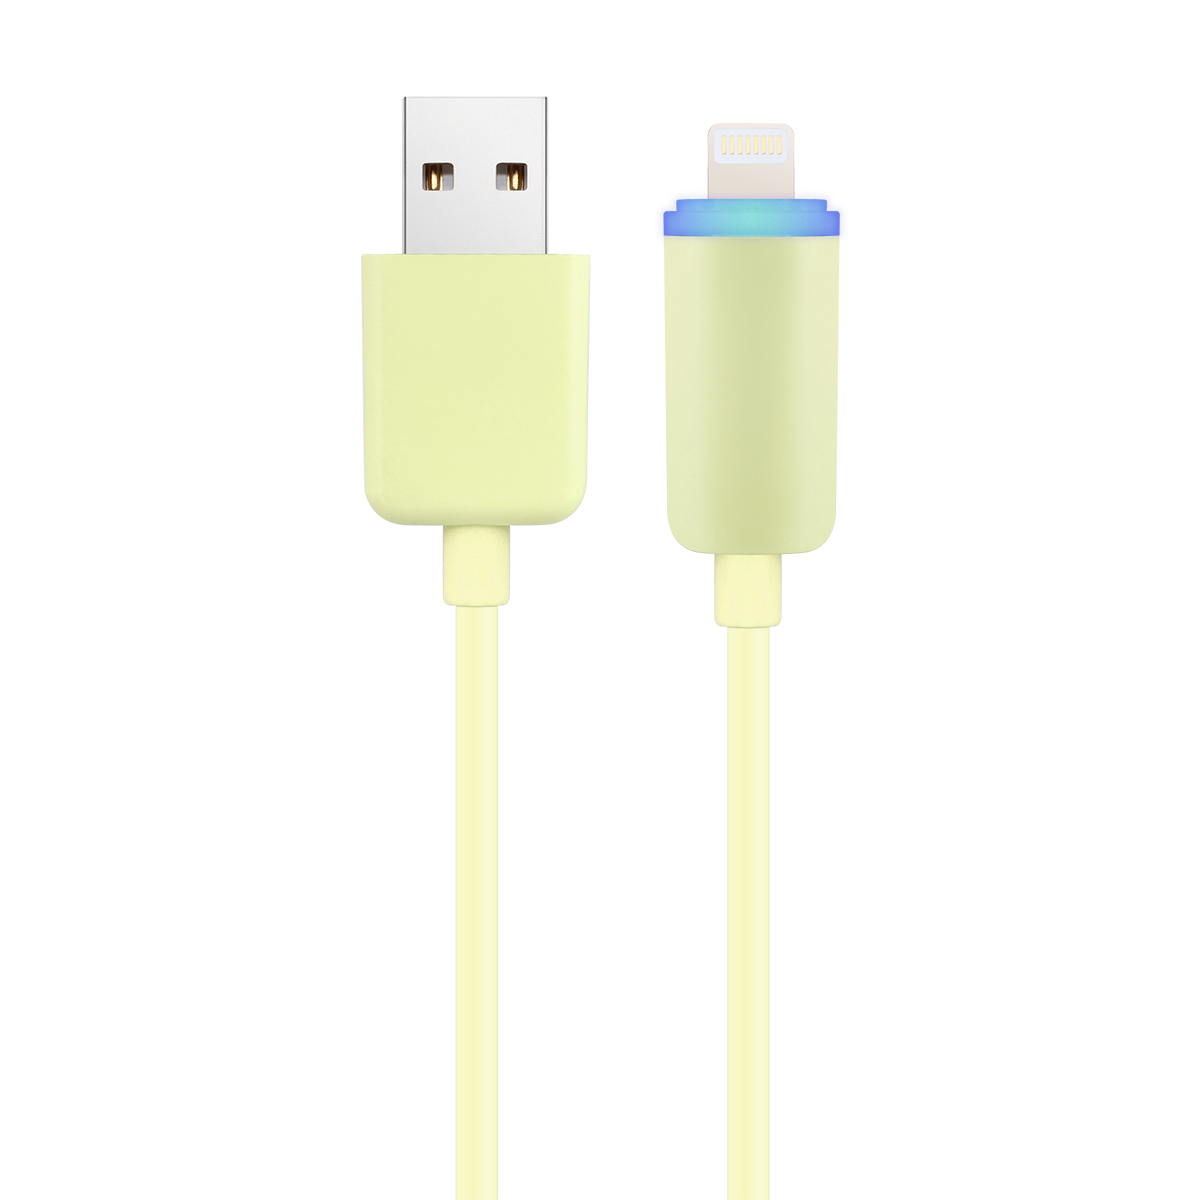 LED Data Sync Micro USB 8 pin Charger Cable for iPhone 7 - Yellow